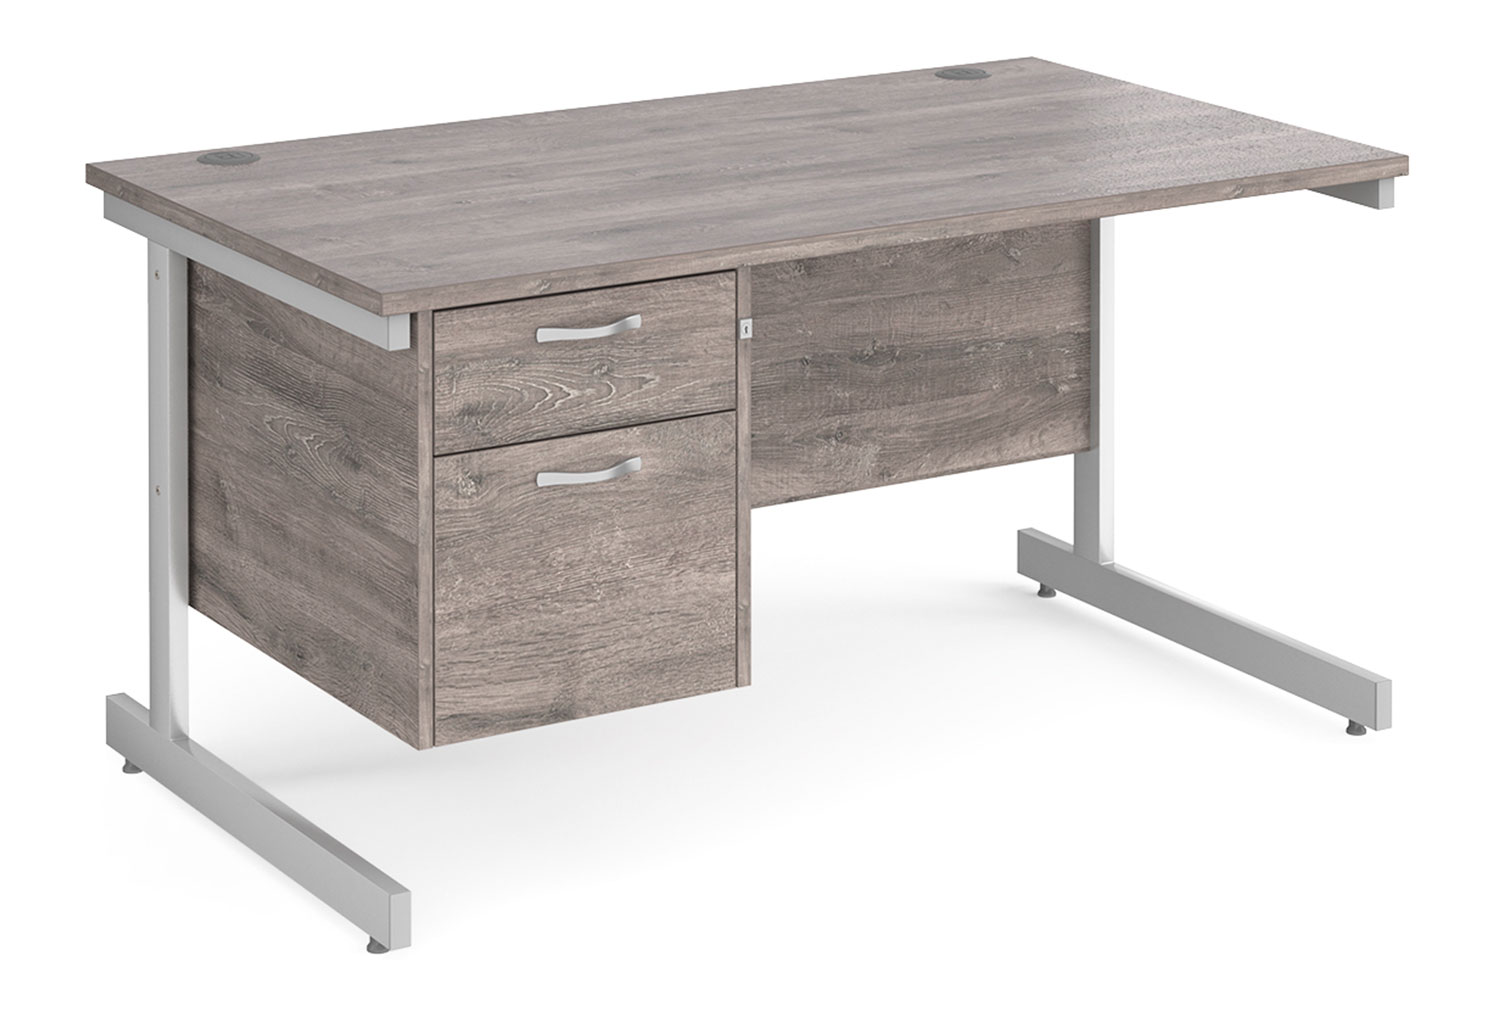 All Grey Oak C-Leg Clerical Office Desk 2 Drawer, 140wx80dx73h (cm), Express Delivery